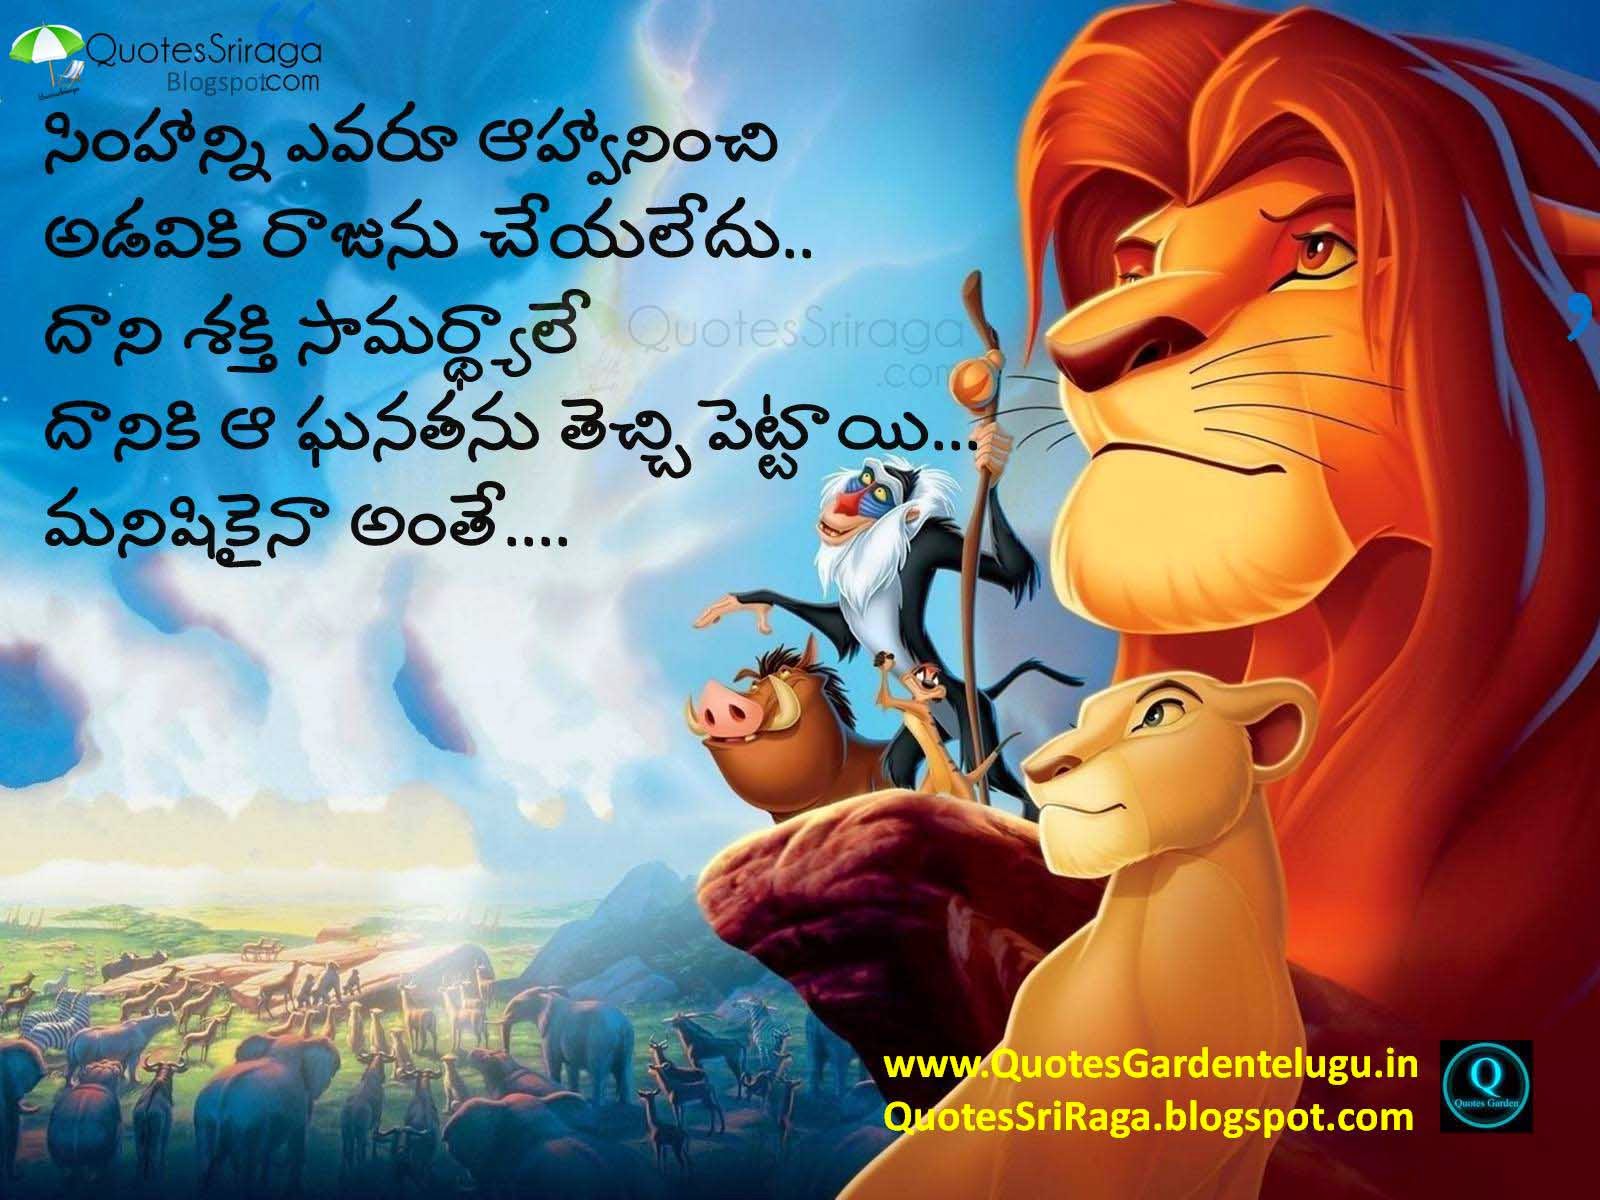 Best Telugu Quotes - Top inspirational Life Quotes - Famous Quotes with